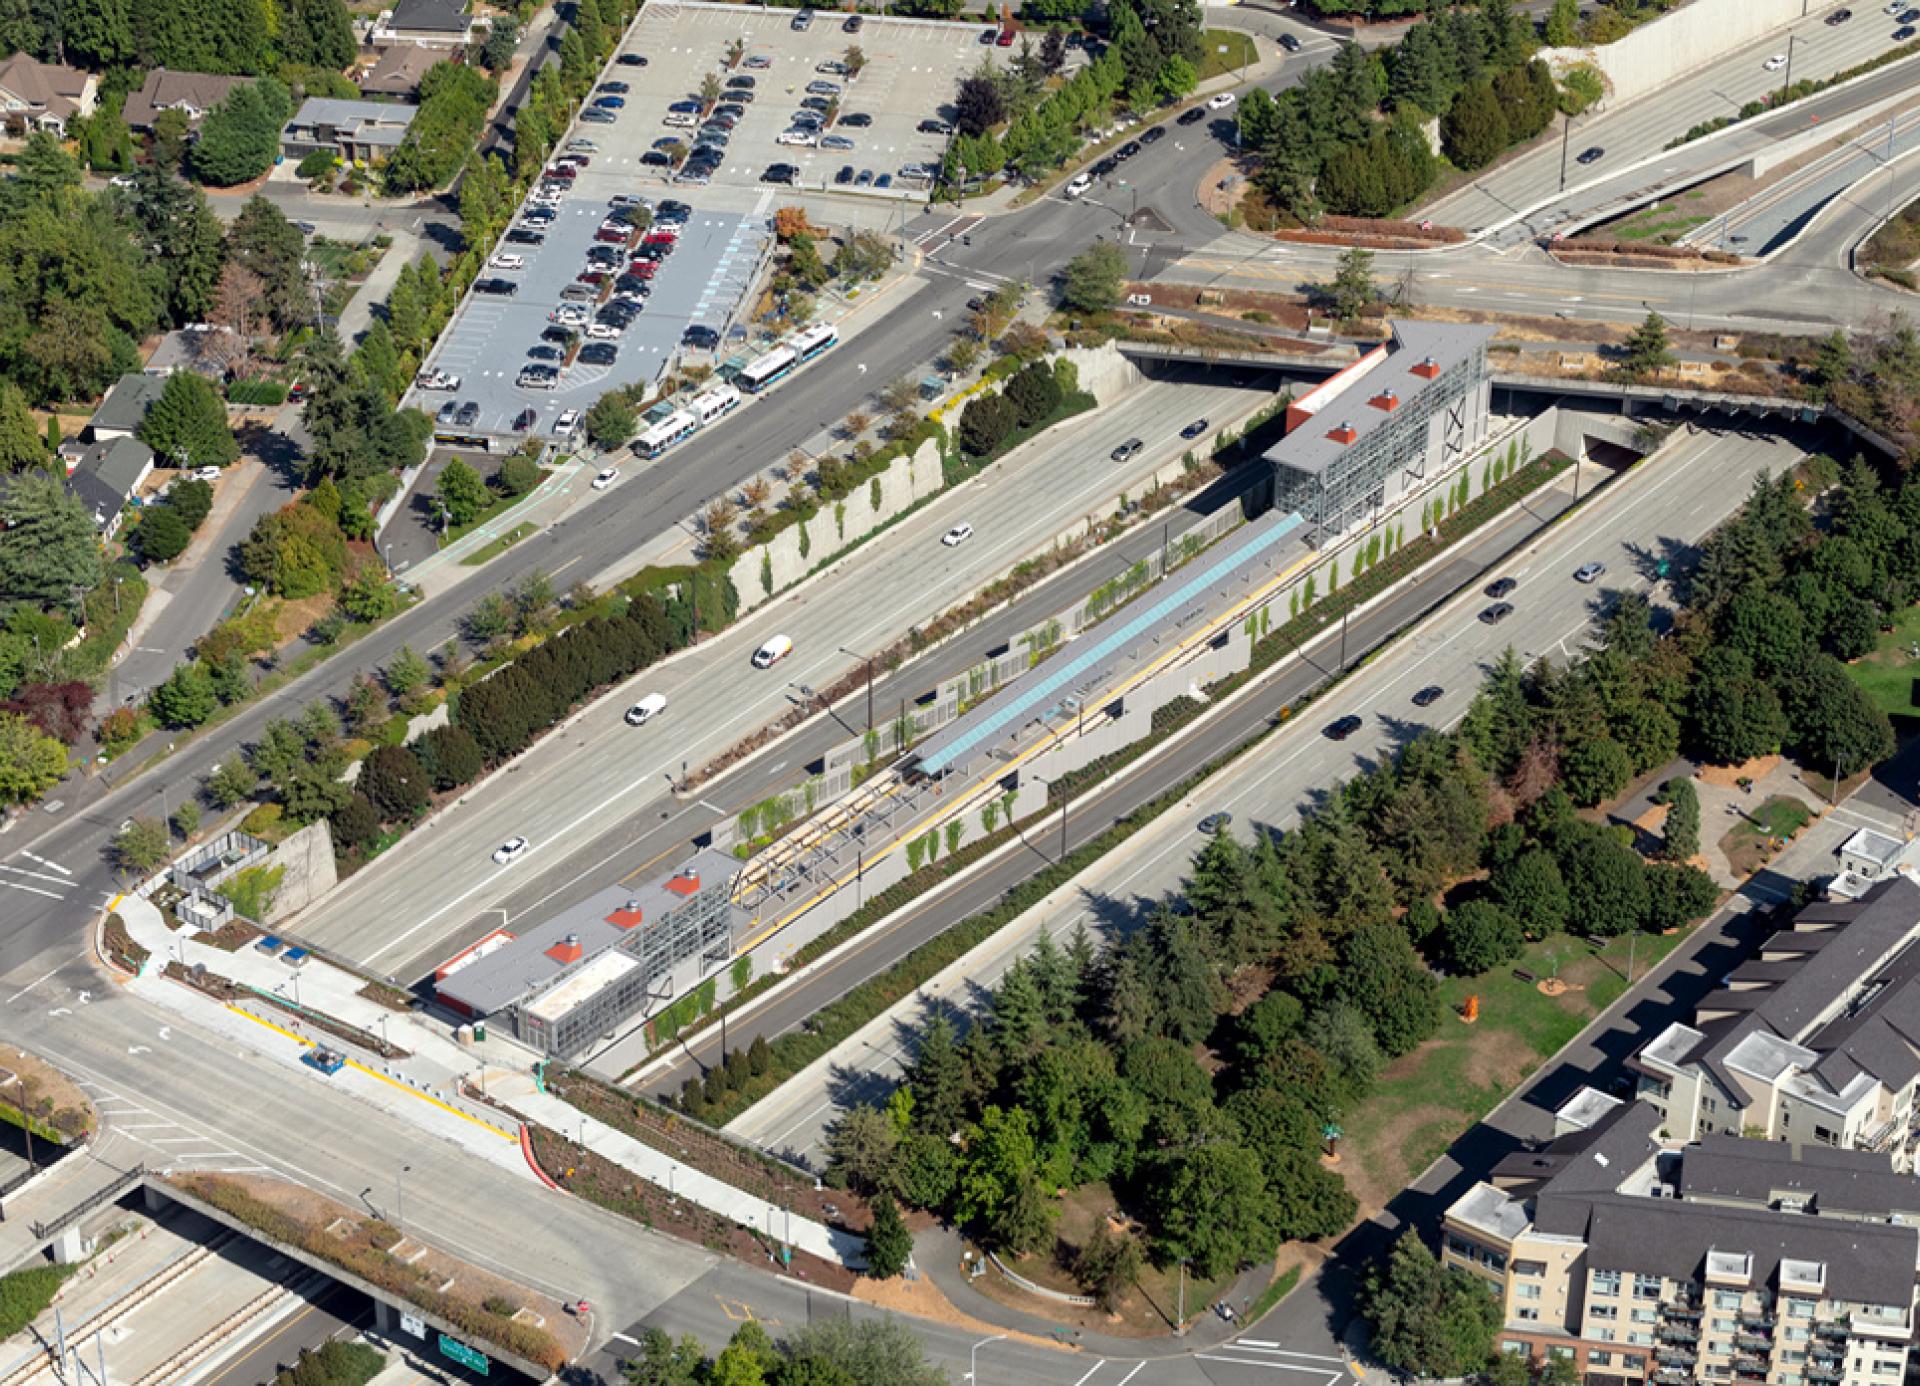 Aerial view of the Mercer Island transit station.